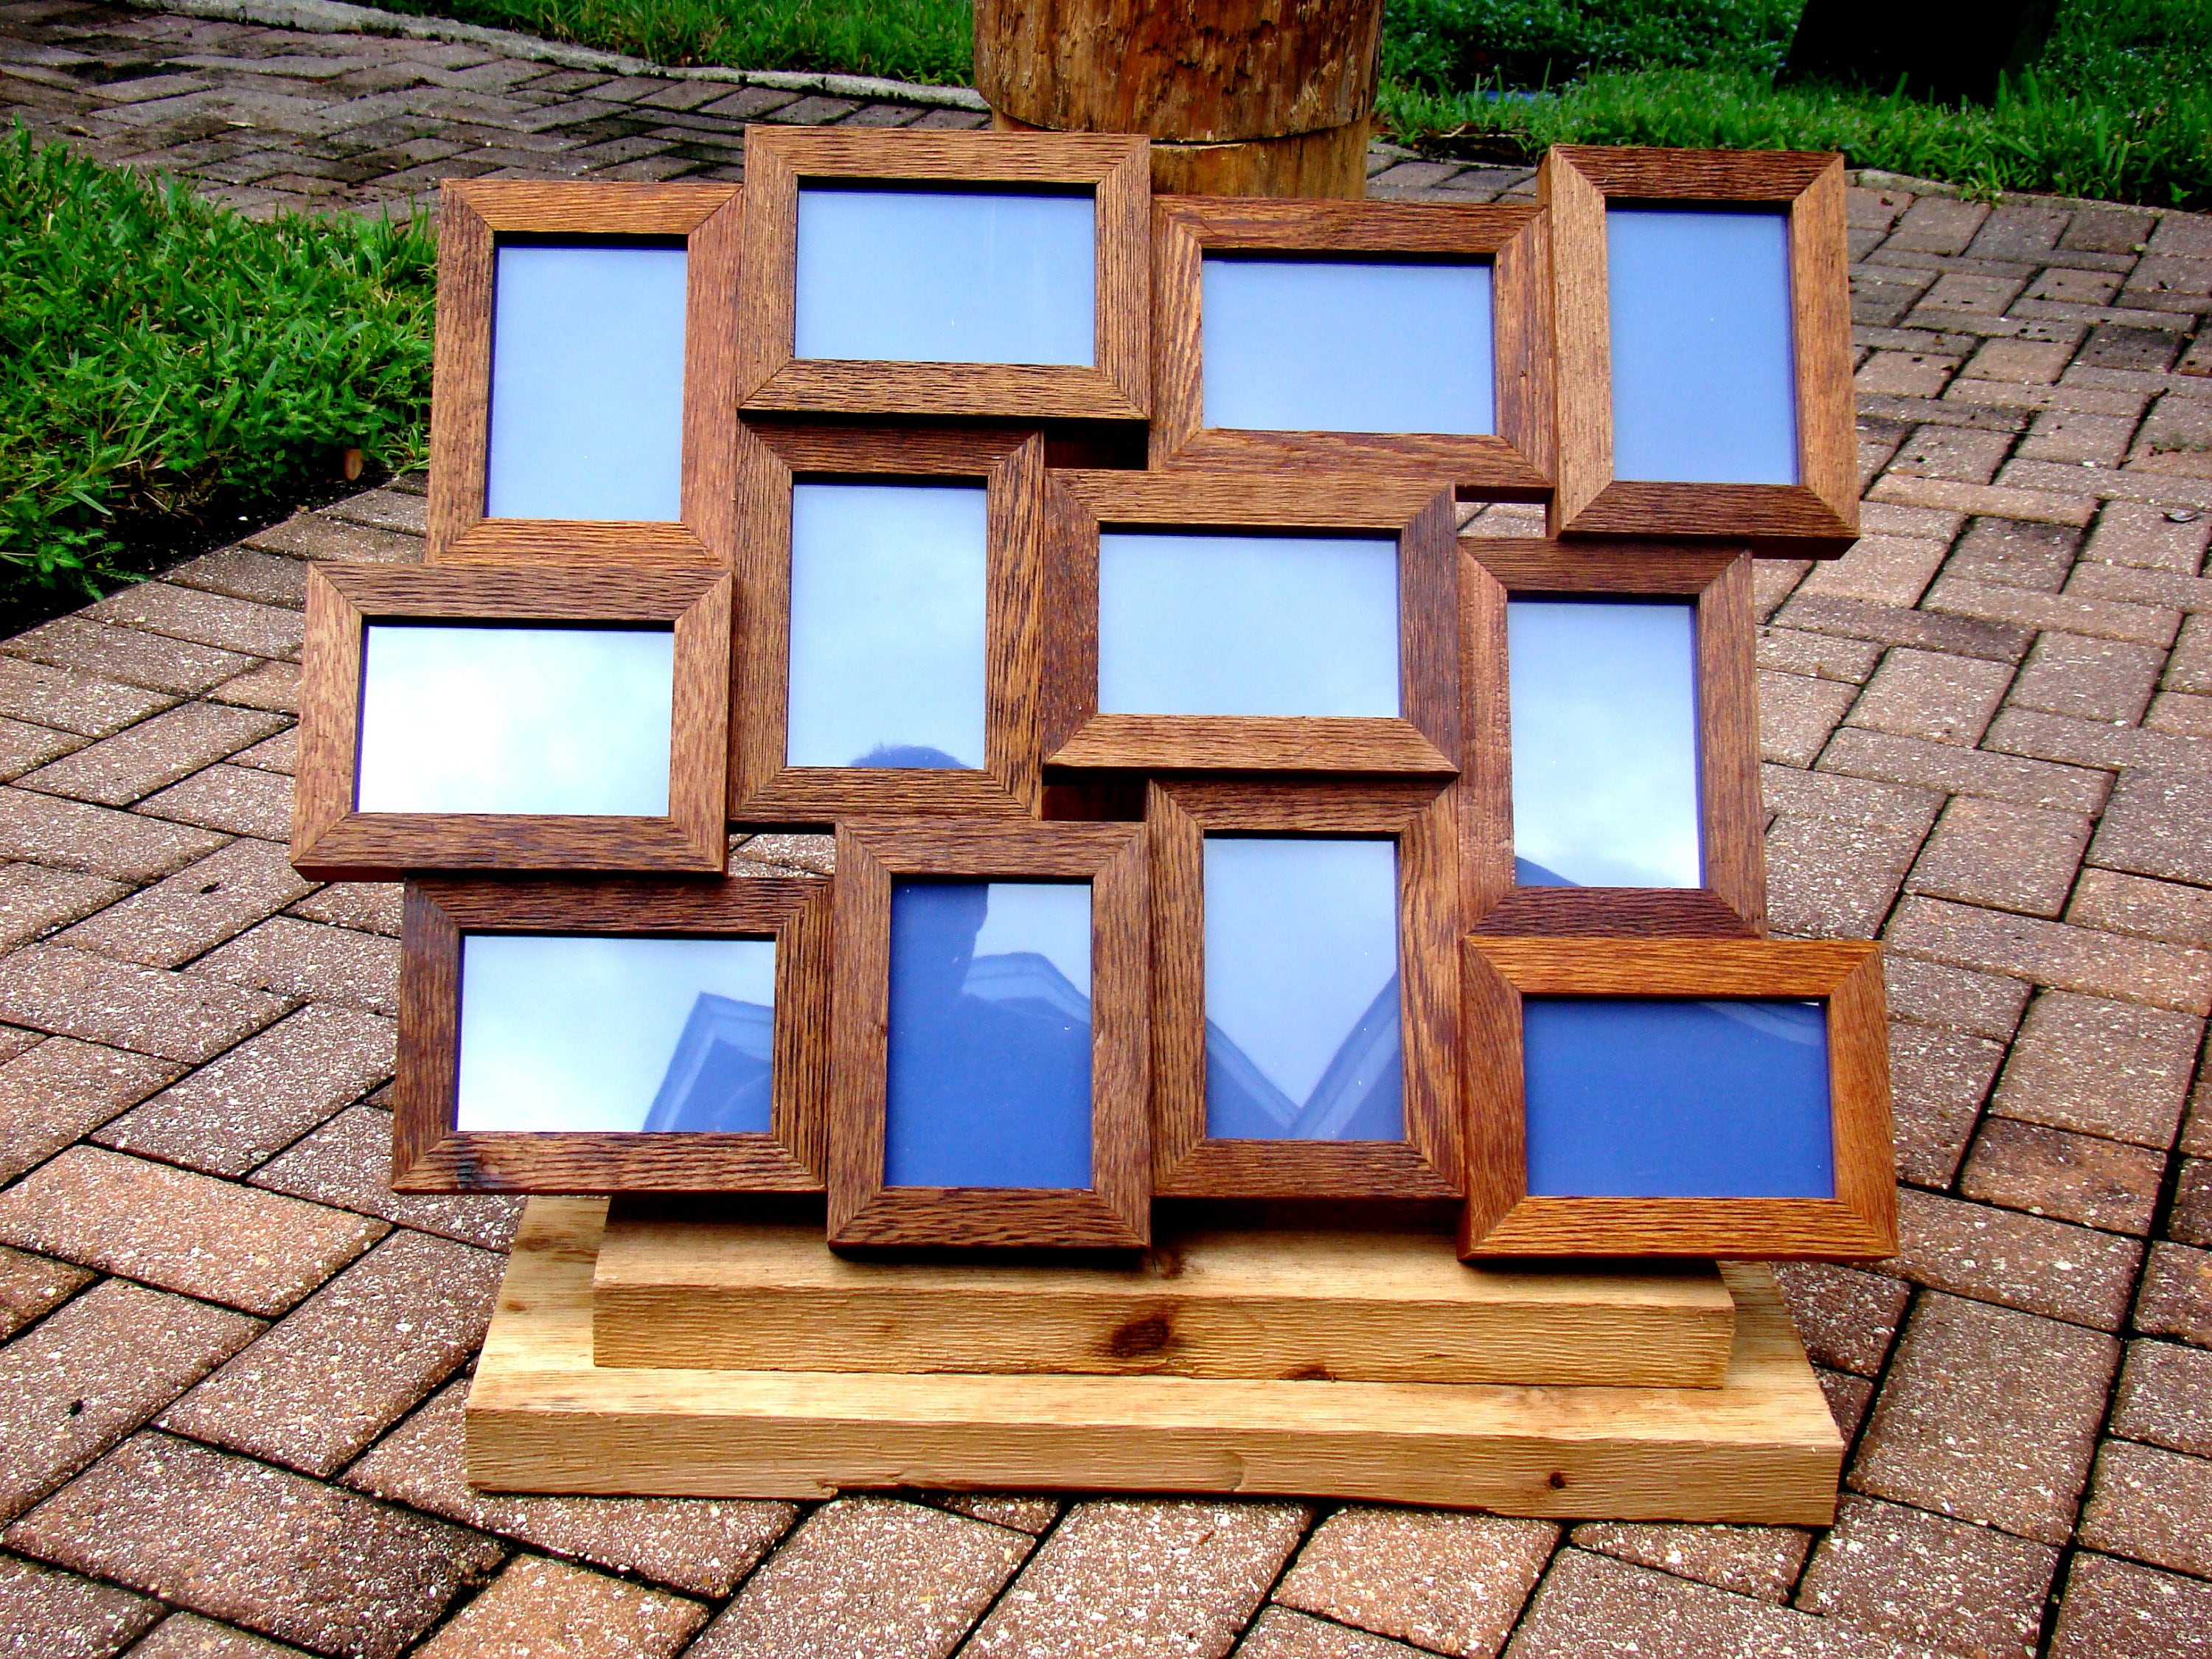 Barnwood Rustic Panel 4x6 Multiple Wood Collage Picture Frame with 4 Openings 